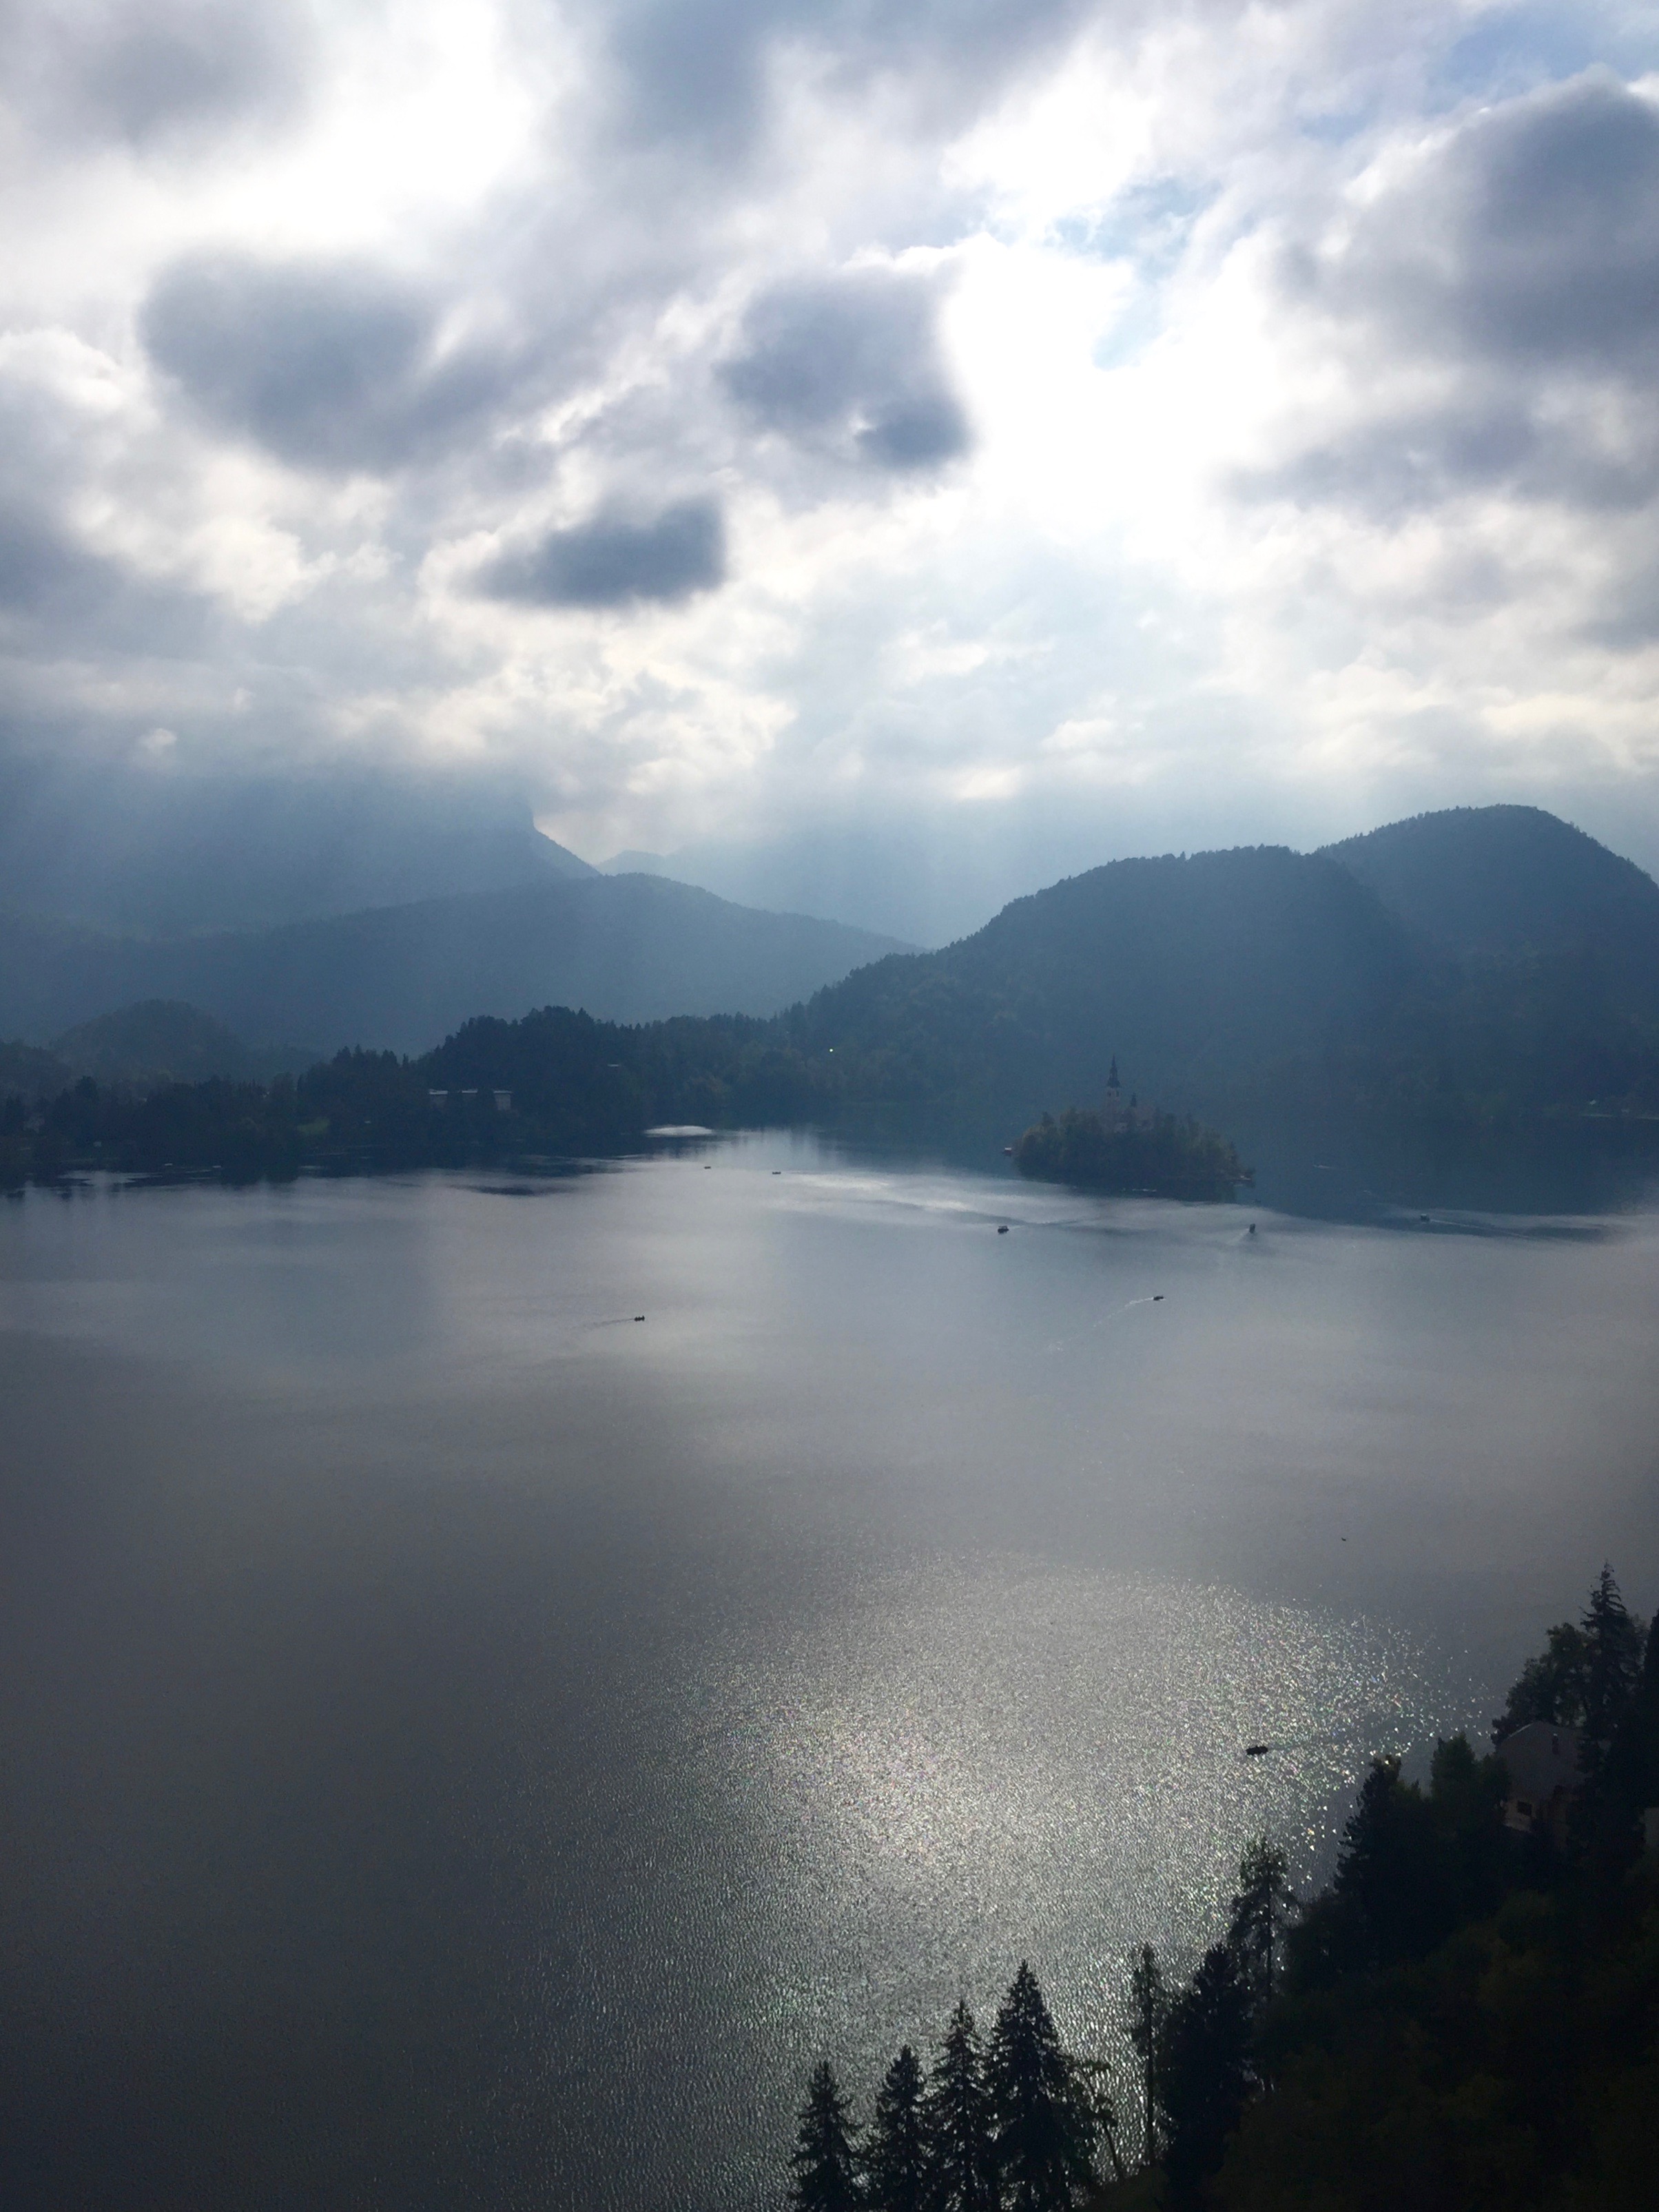 Bled Island from Bled Castle